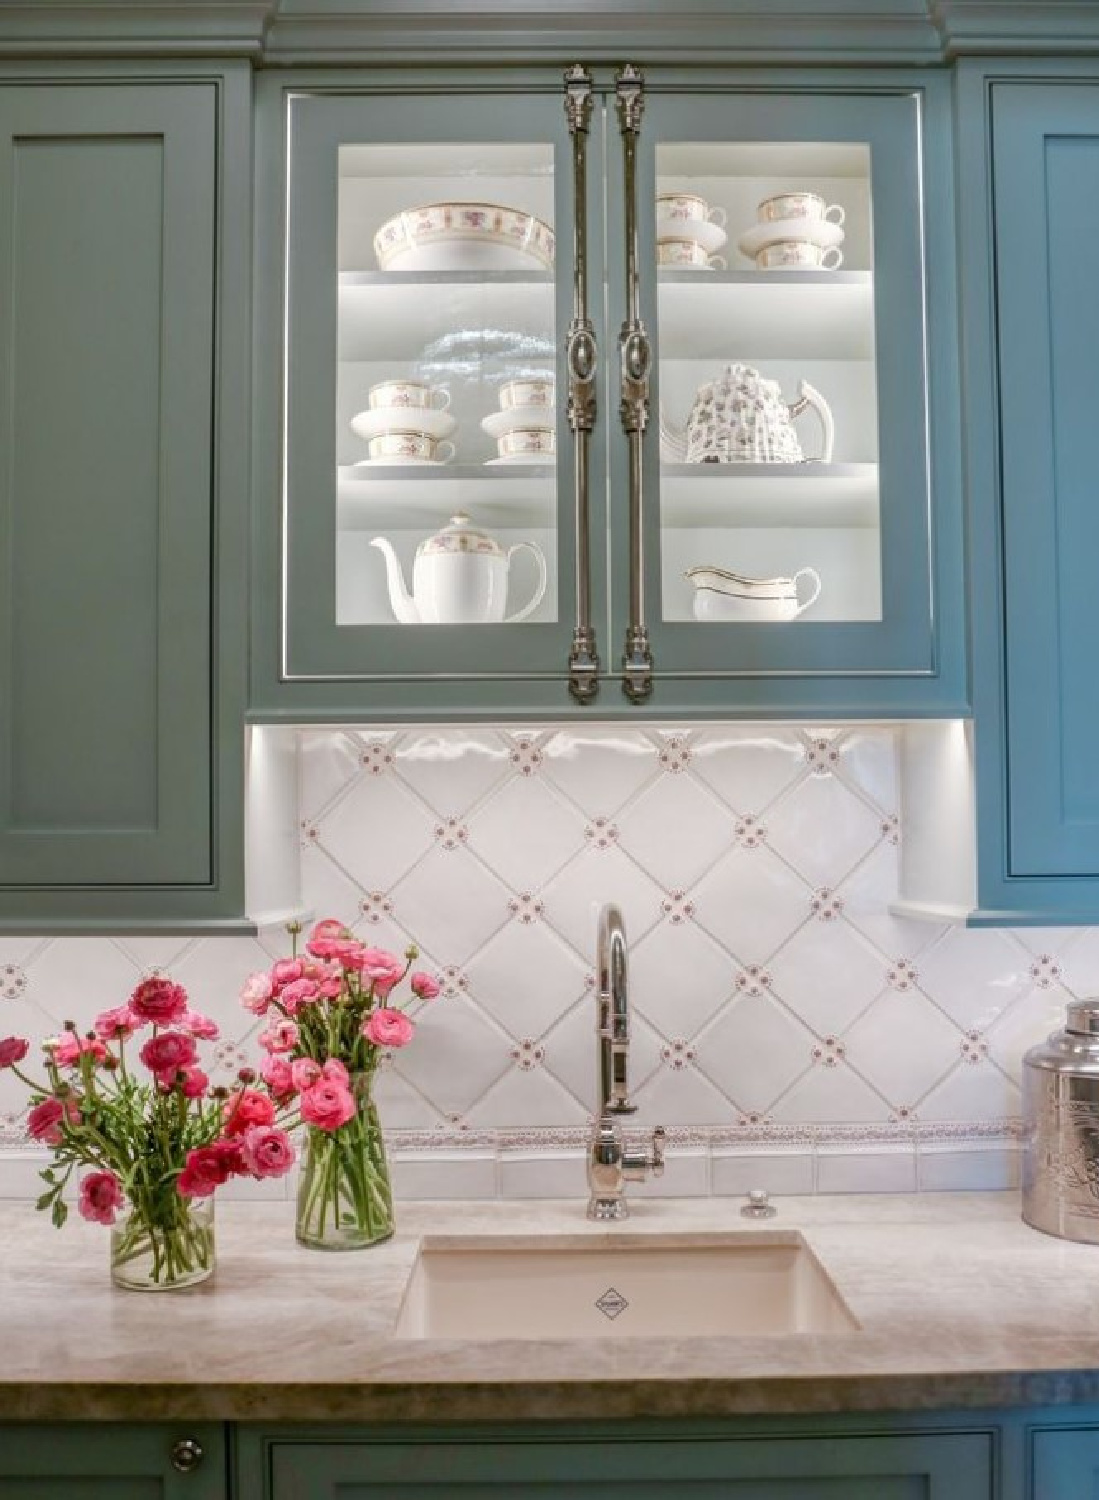 Beautiful blue kitchen cabinets with glass doors - design: Isabel Dellinger Candelaria. #bluekitchens #traditionalstyle